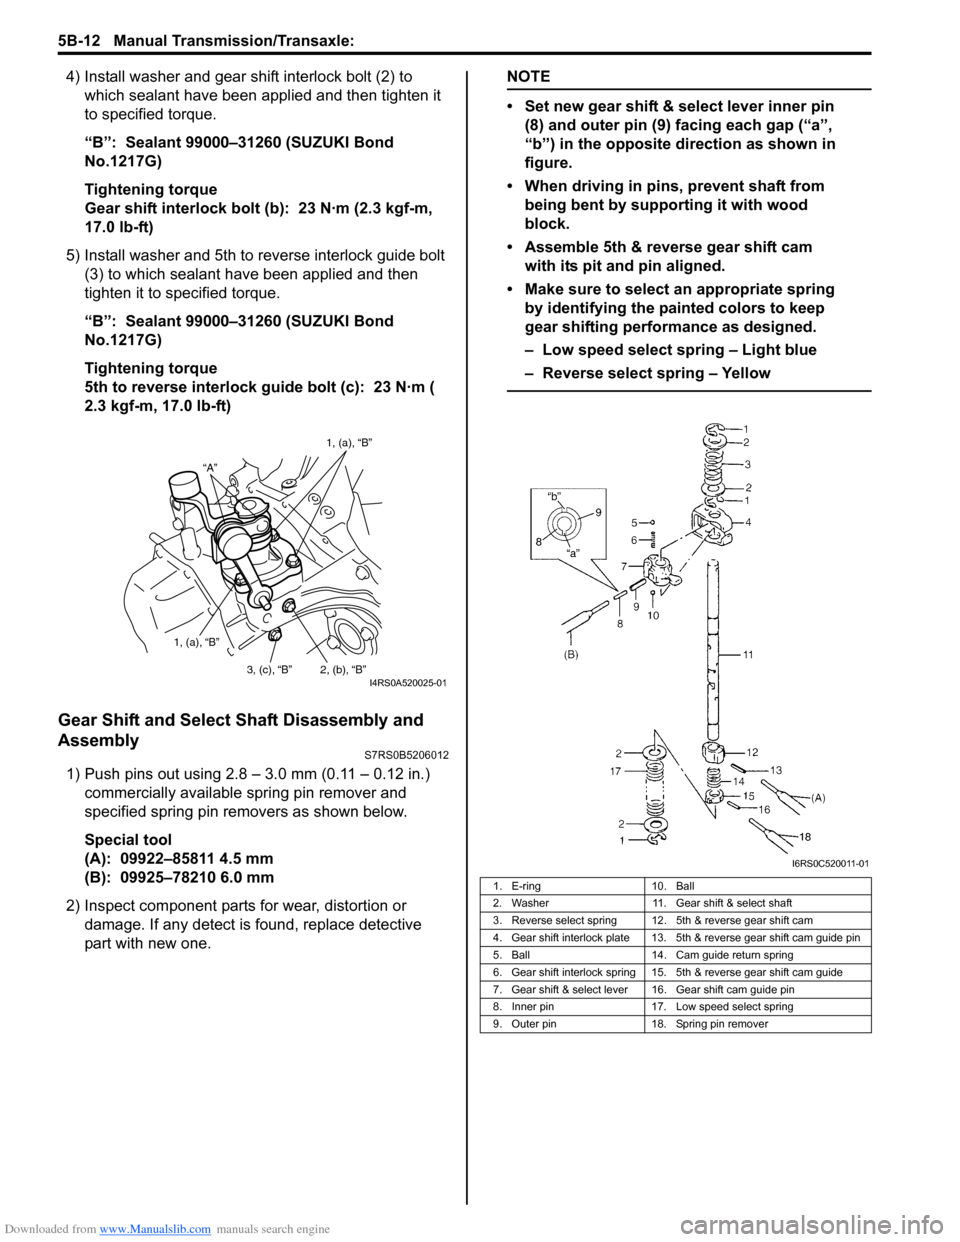 SUZUKI SWIFT 2007 2.G Service Repair Manual Downloaded from www.Manualslib.com manuals search engine 5B-12 Manual Transmission/Transaxle: 
4) Install washer and gear shift interlock bolt (2) to which sealant have been app lied and then tighten 